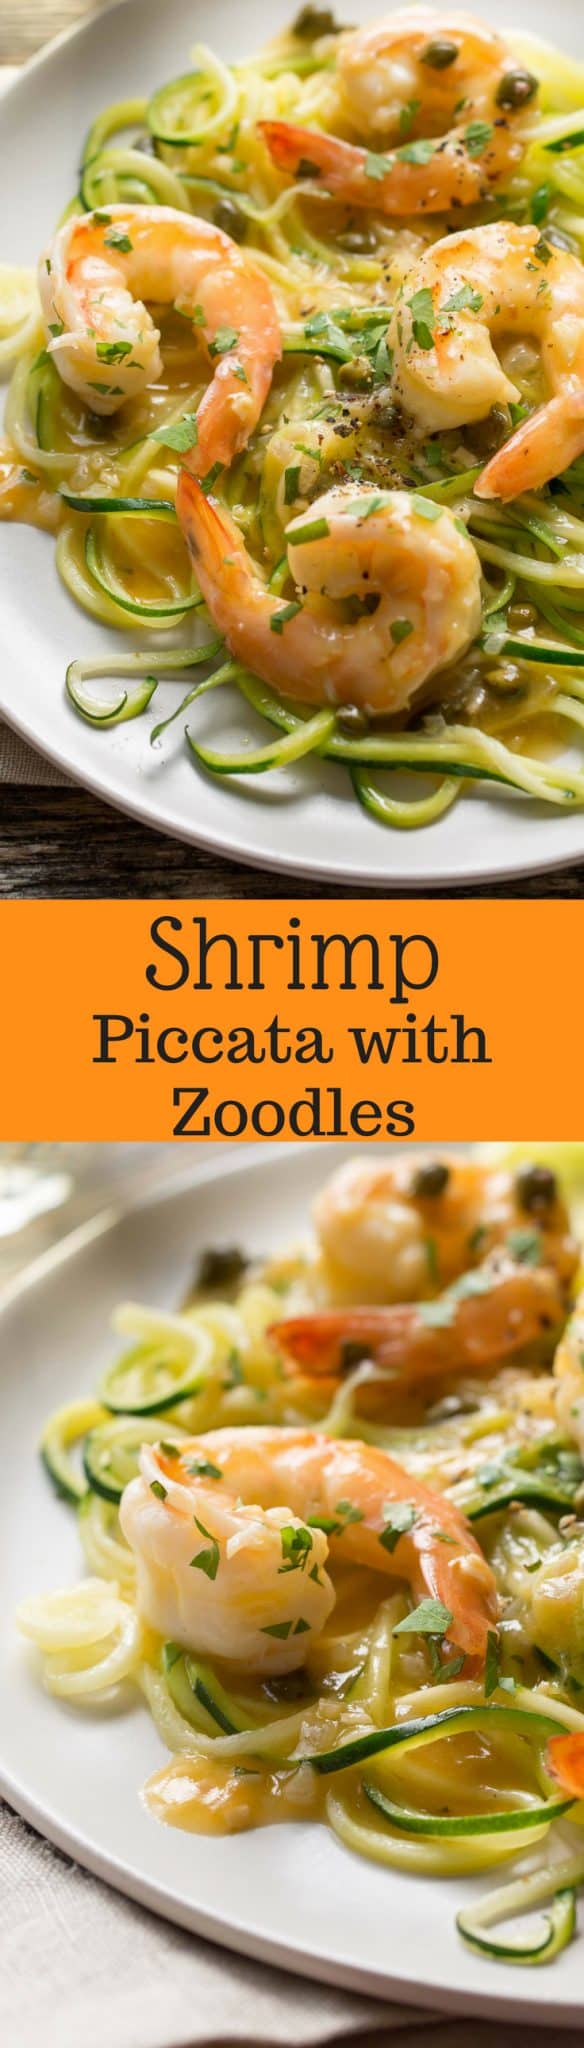 Shrimp Piccata with Zoodles - Zucchini noodles tossed with shrimp sautéed in garlic and topped with a white wine sauce. Served with capers and a squeeze of lemon ... dinner is on the table in less than 45 minutes! www.savingdessert.com #savingroomfordessert #zoodles #shrimp #piccata #zucchininoodles